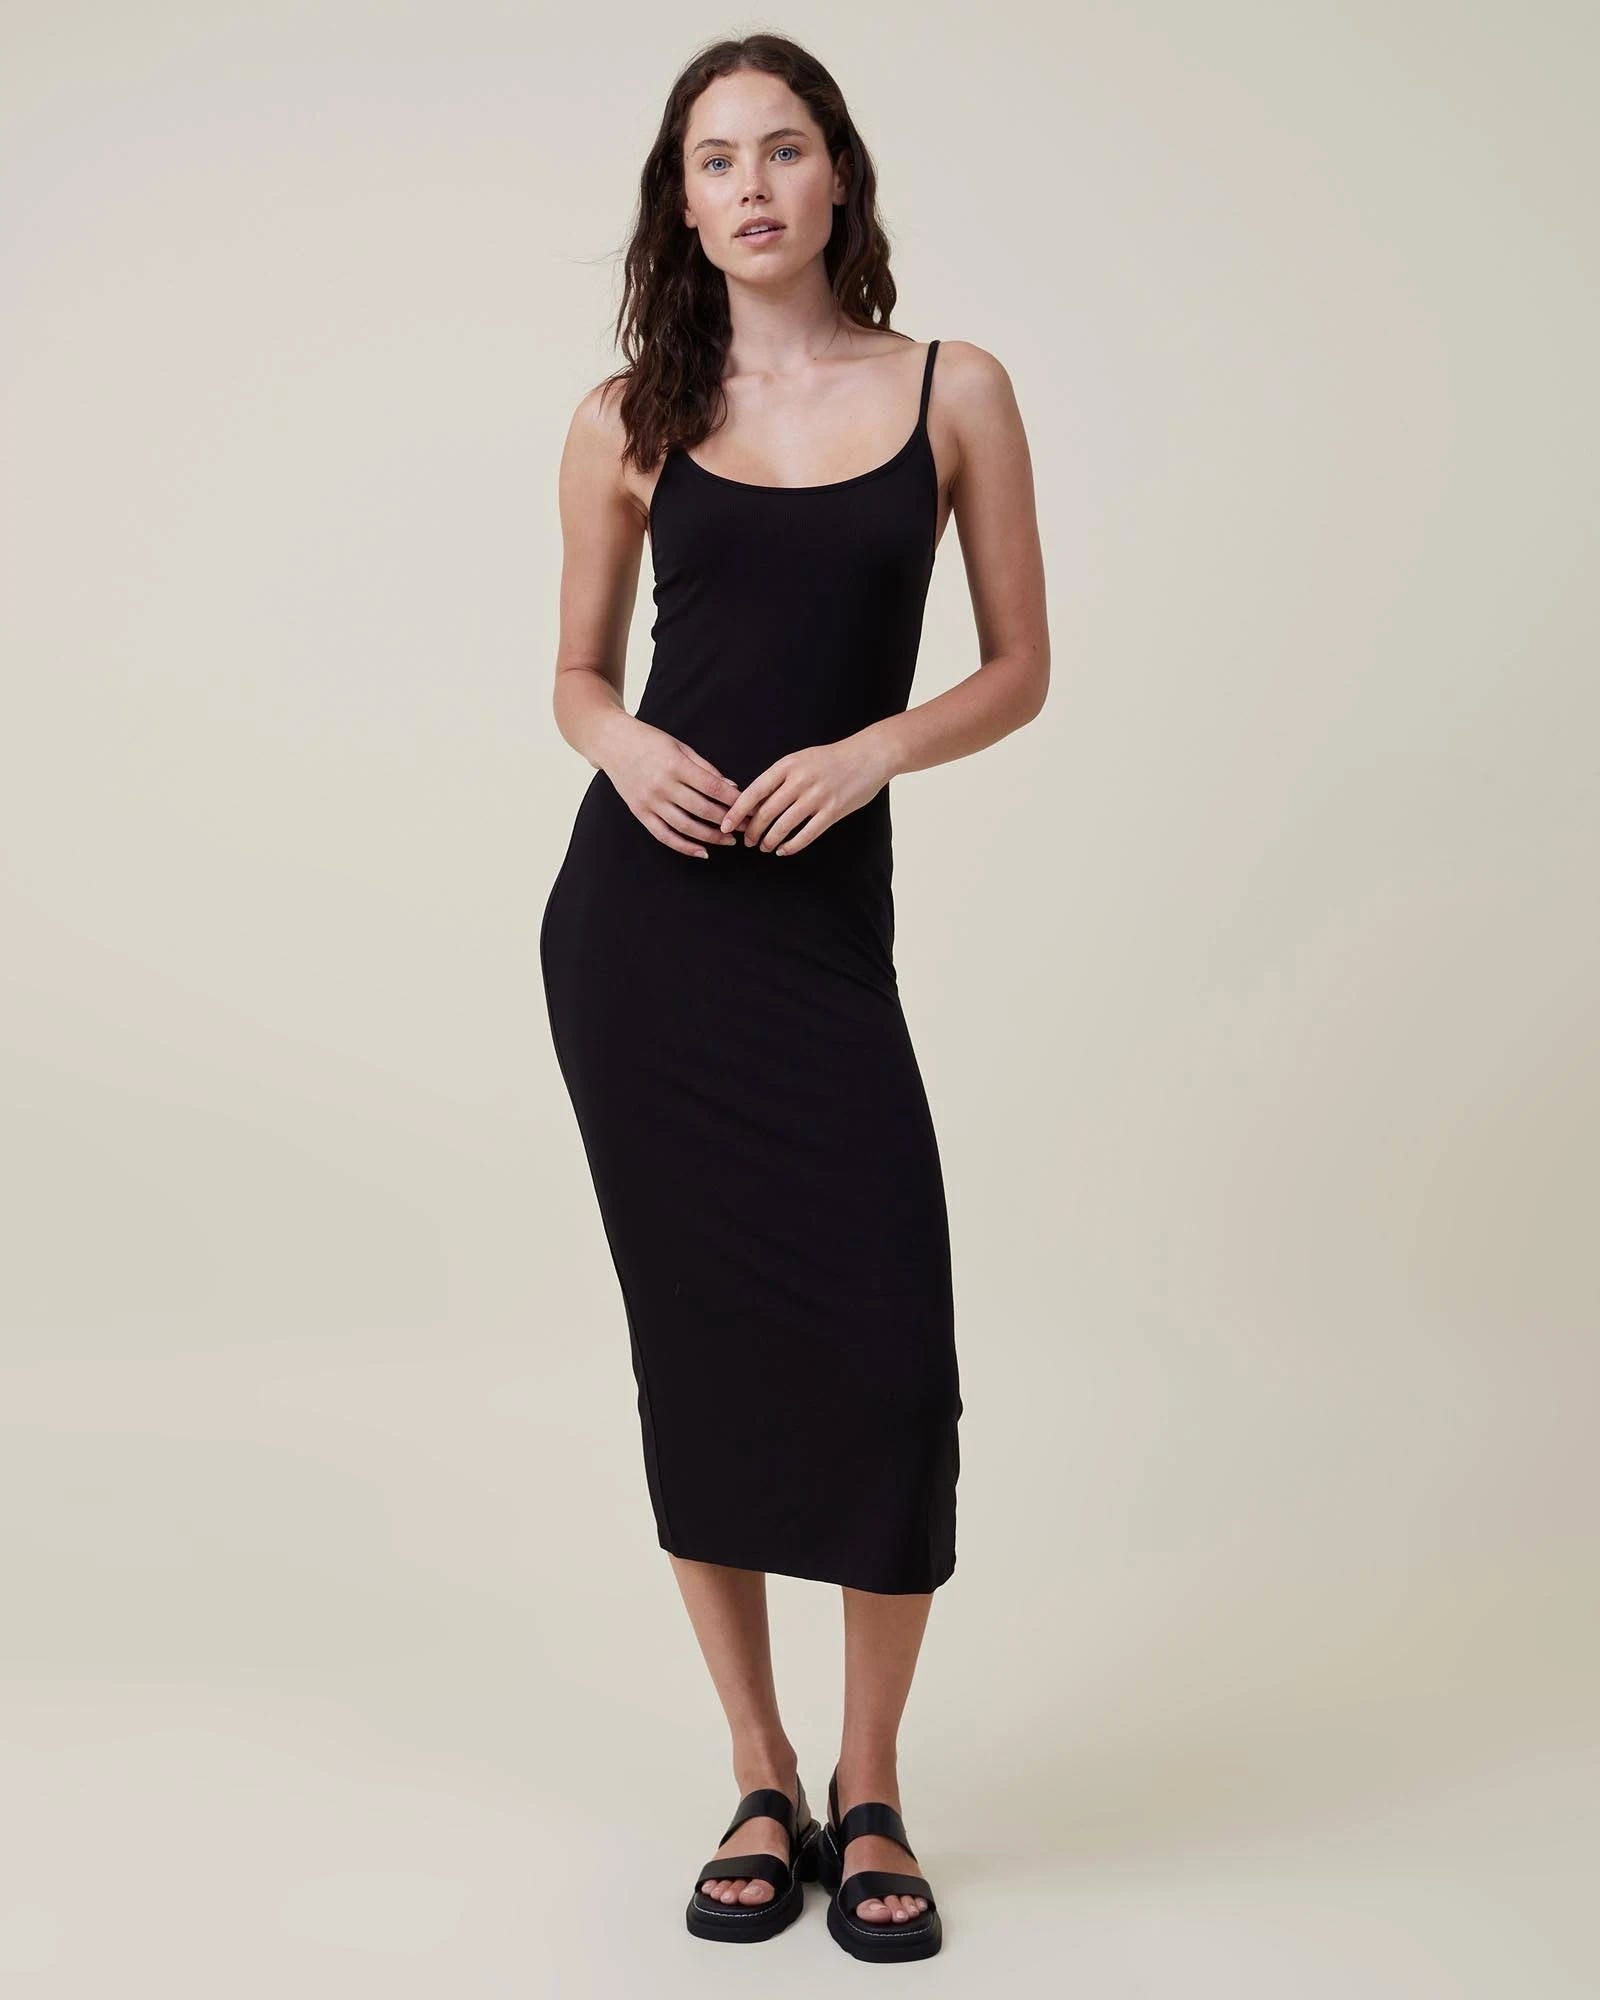 Maxi Dress: 90s-Inspired Jersey Slip with Adjustable Spaghetti Straps | Image